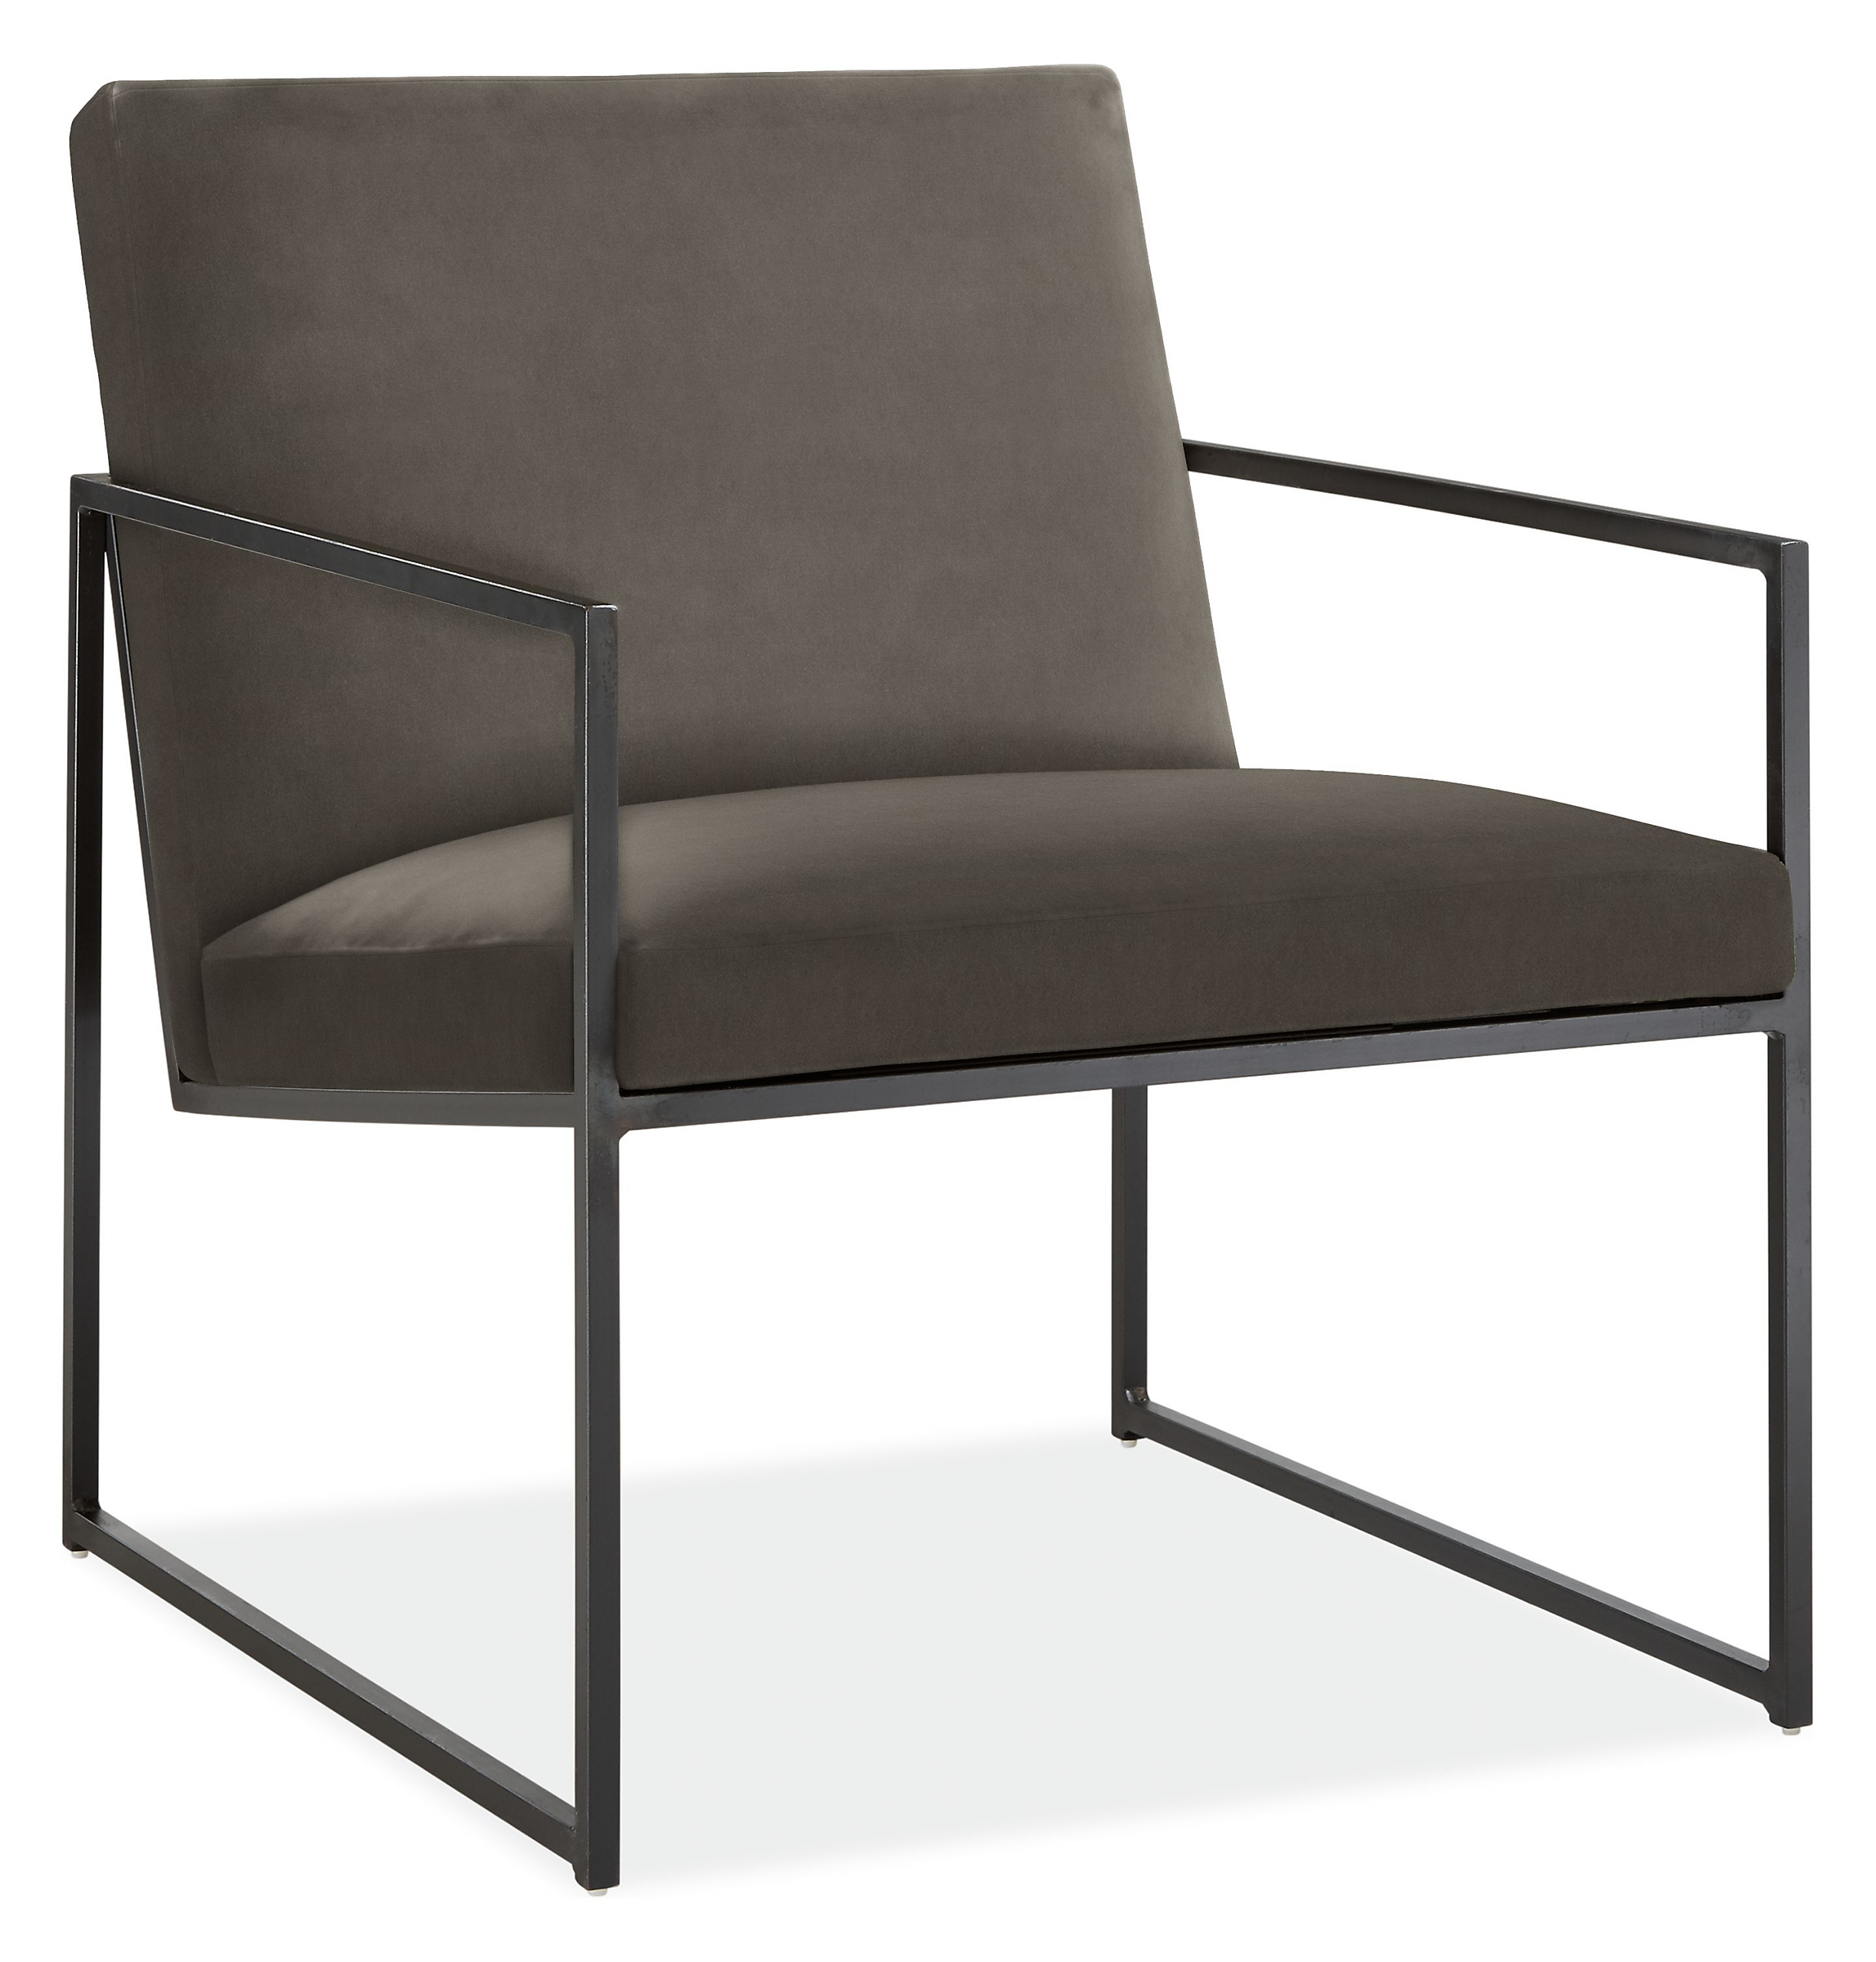 Novato Chair in Banks Charcoal with Natural Steel Frame